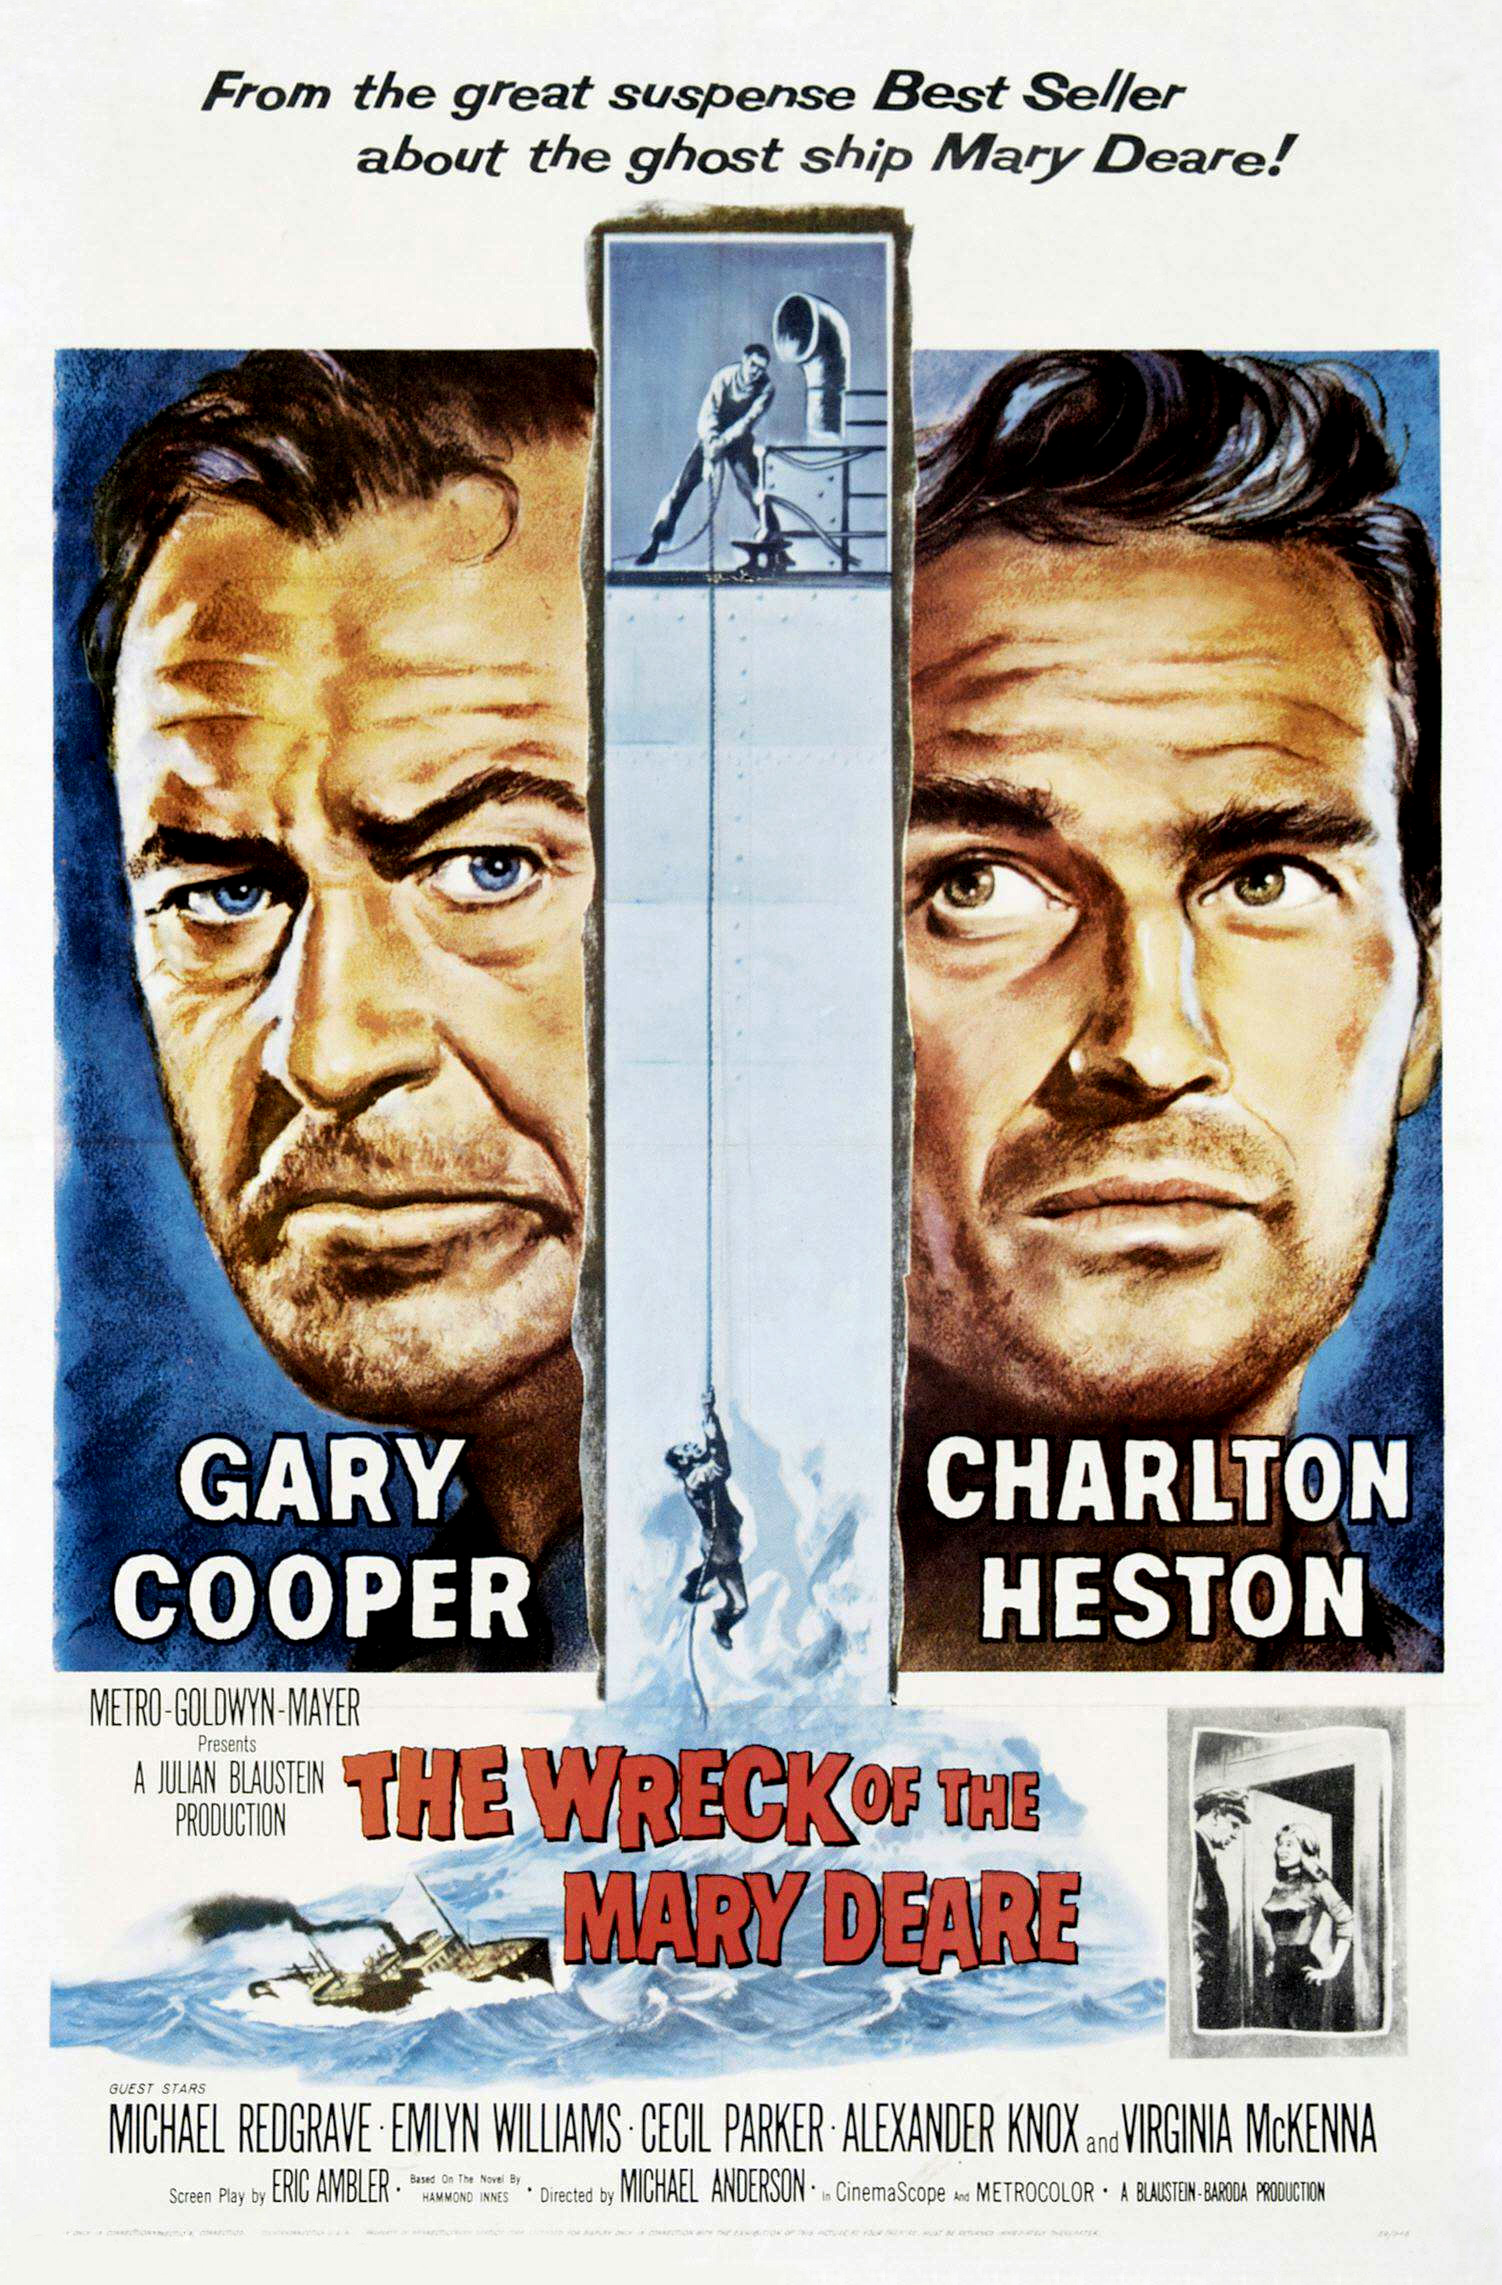 THE WRECK OF THE MARY DEARE (1959)